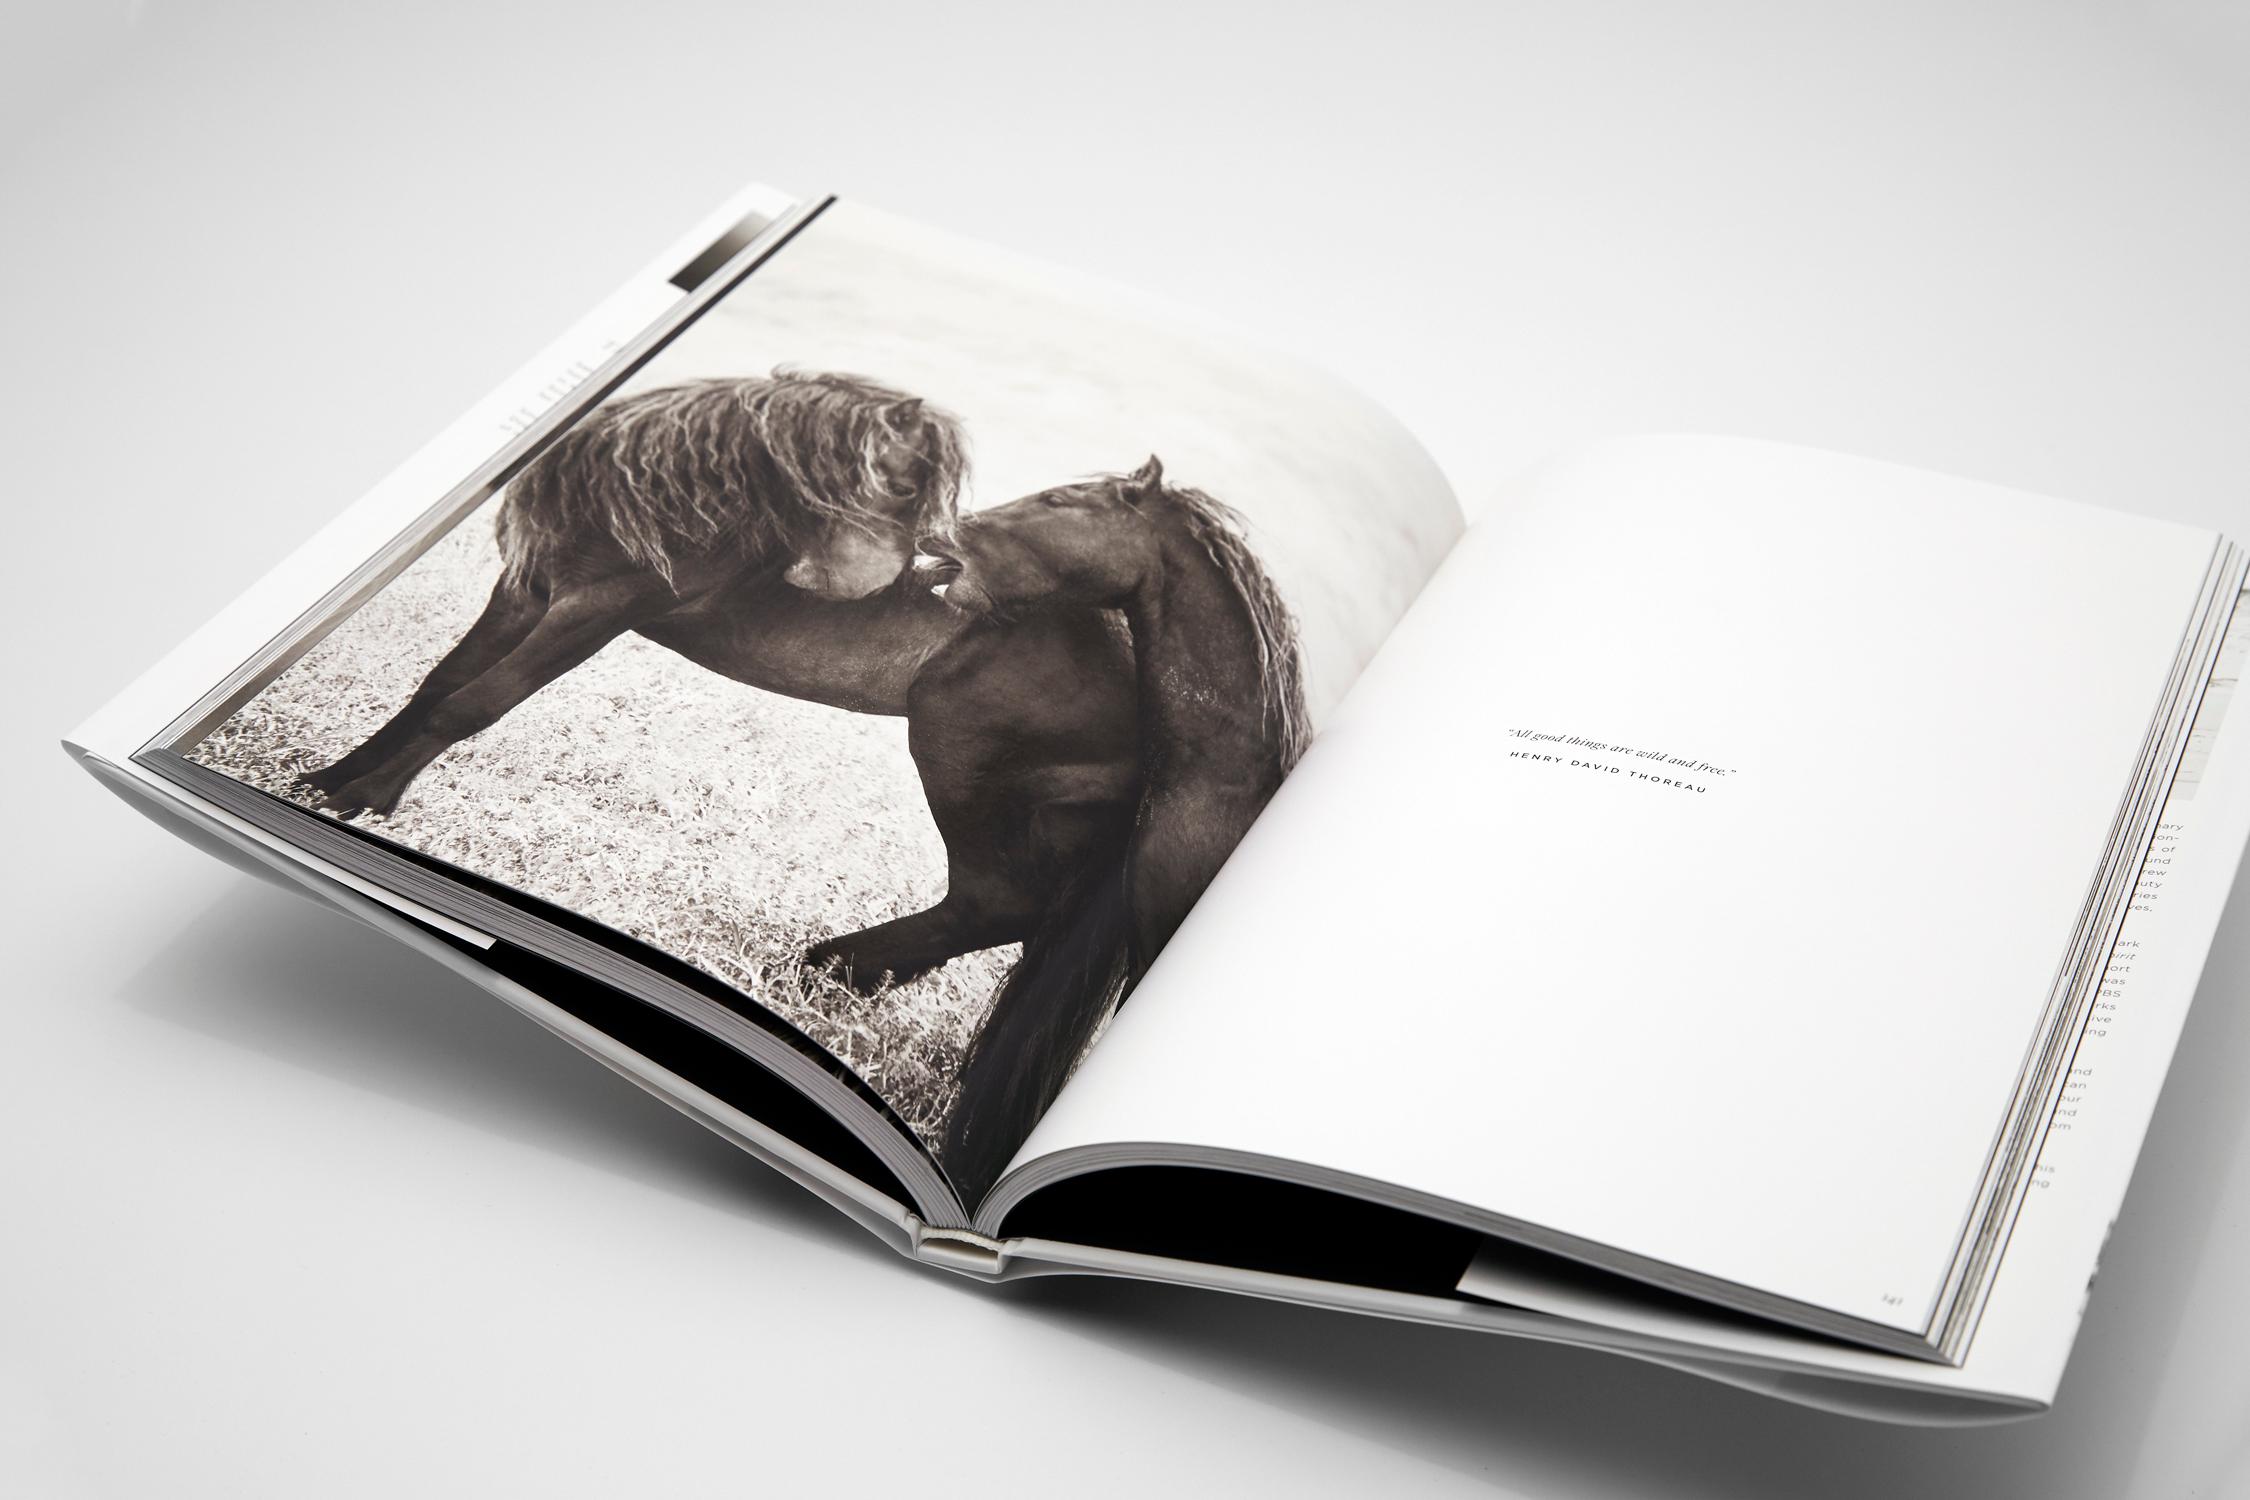 ABOUT THE BOOK
Sable Island is home to one of the last herds of completely wild horses and nothing else. This small strip of earth, often nestled in a blanket of fog 100 miles from land, has long captivated artists. Since 2012, Drew has created one